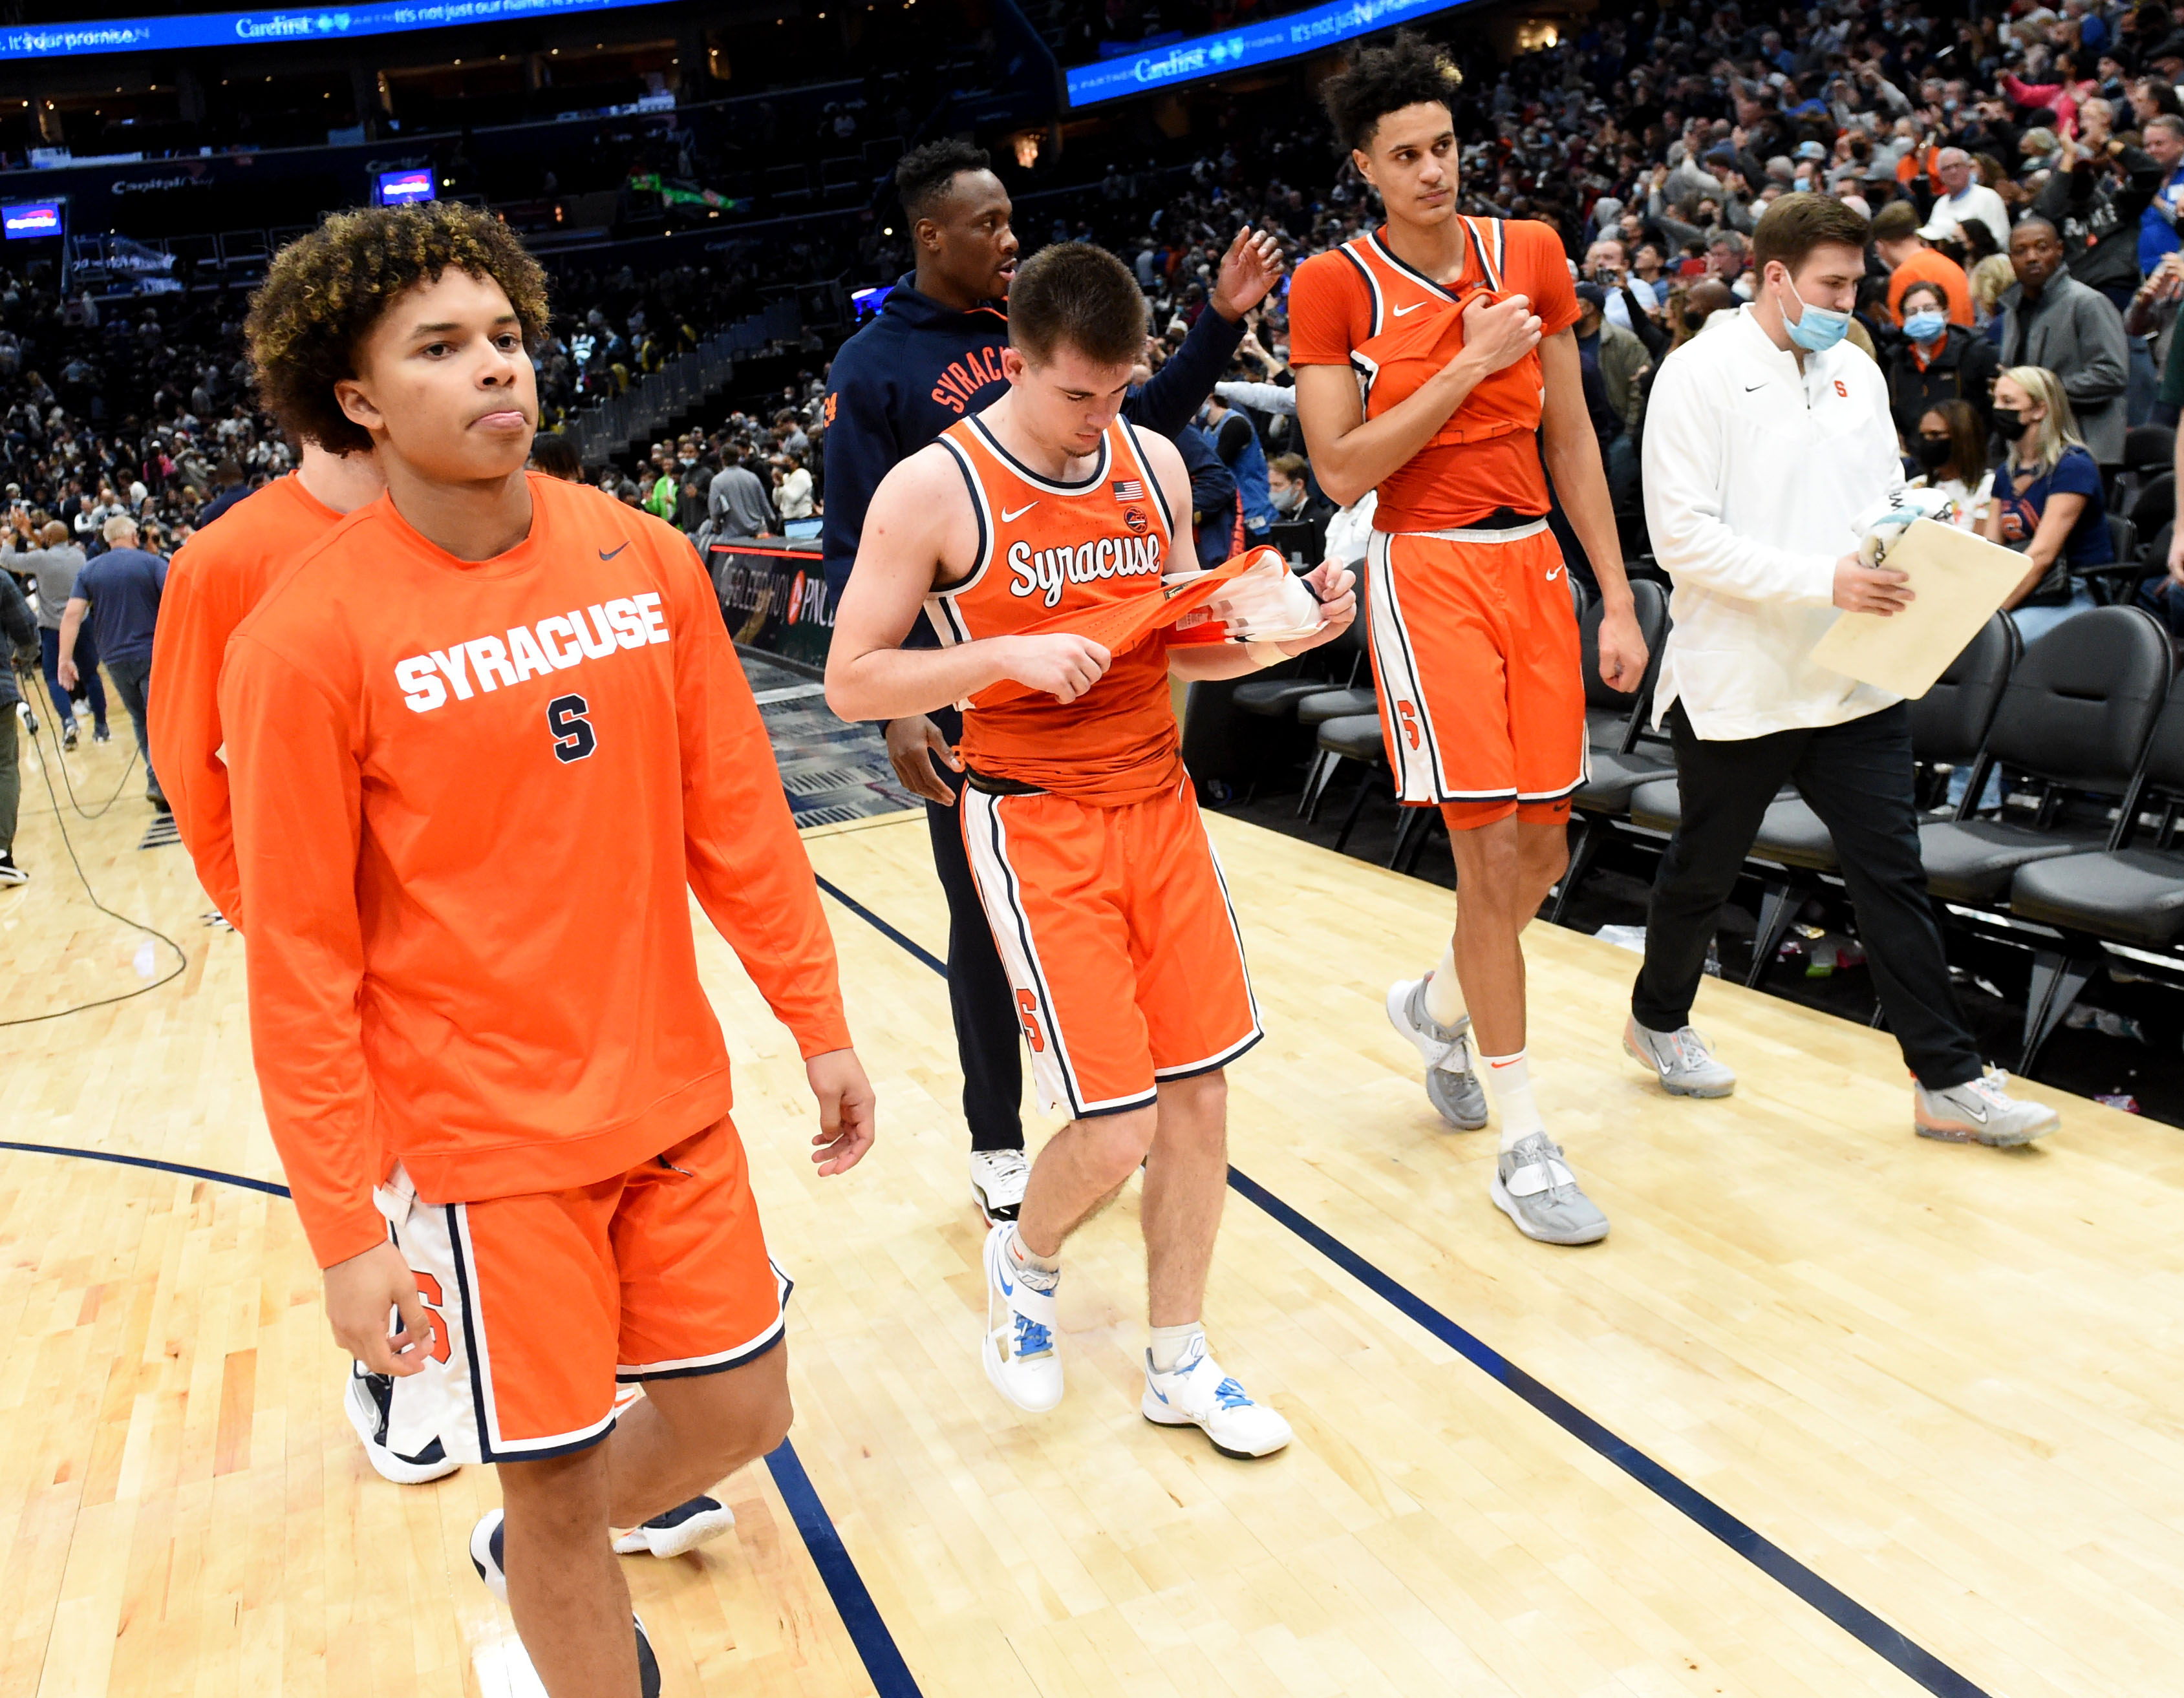 Syracuse men's basketball: toughest games, marquee matchups, and